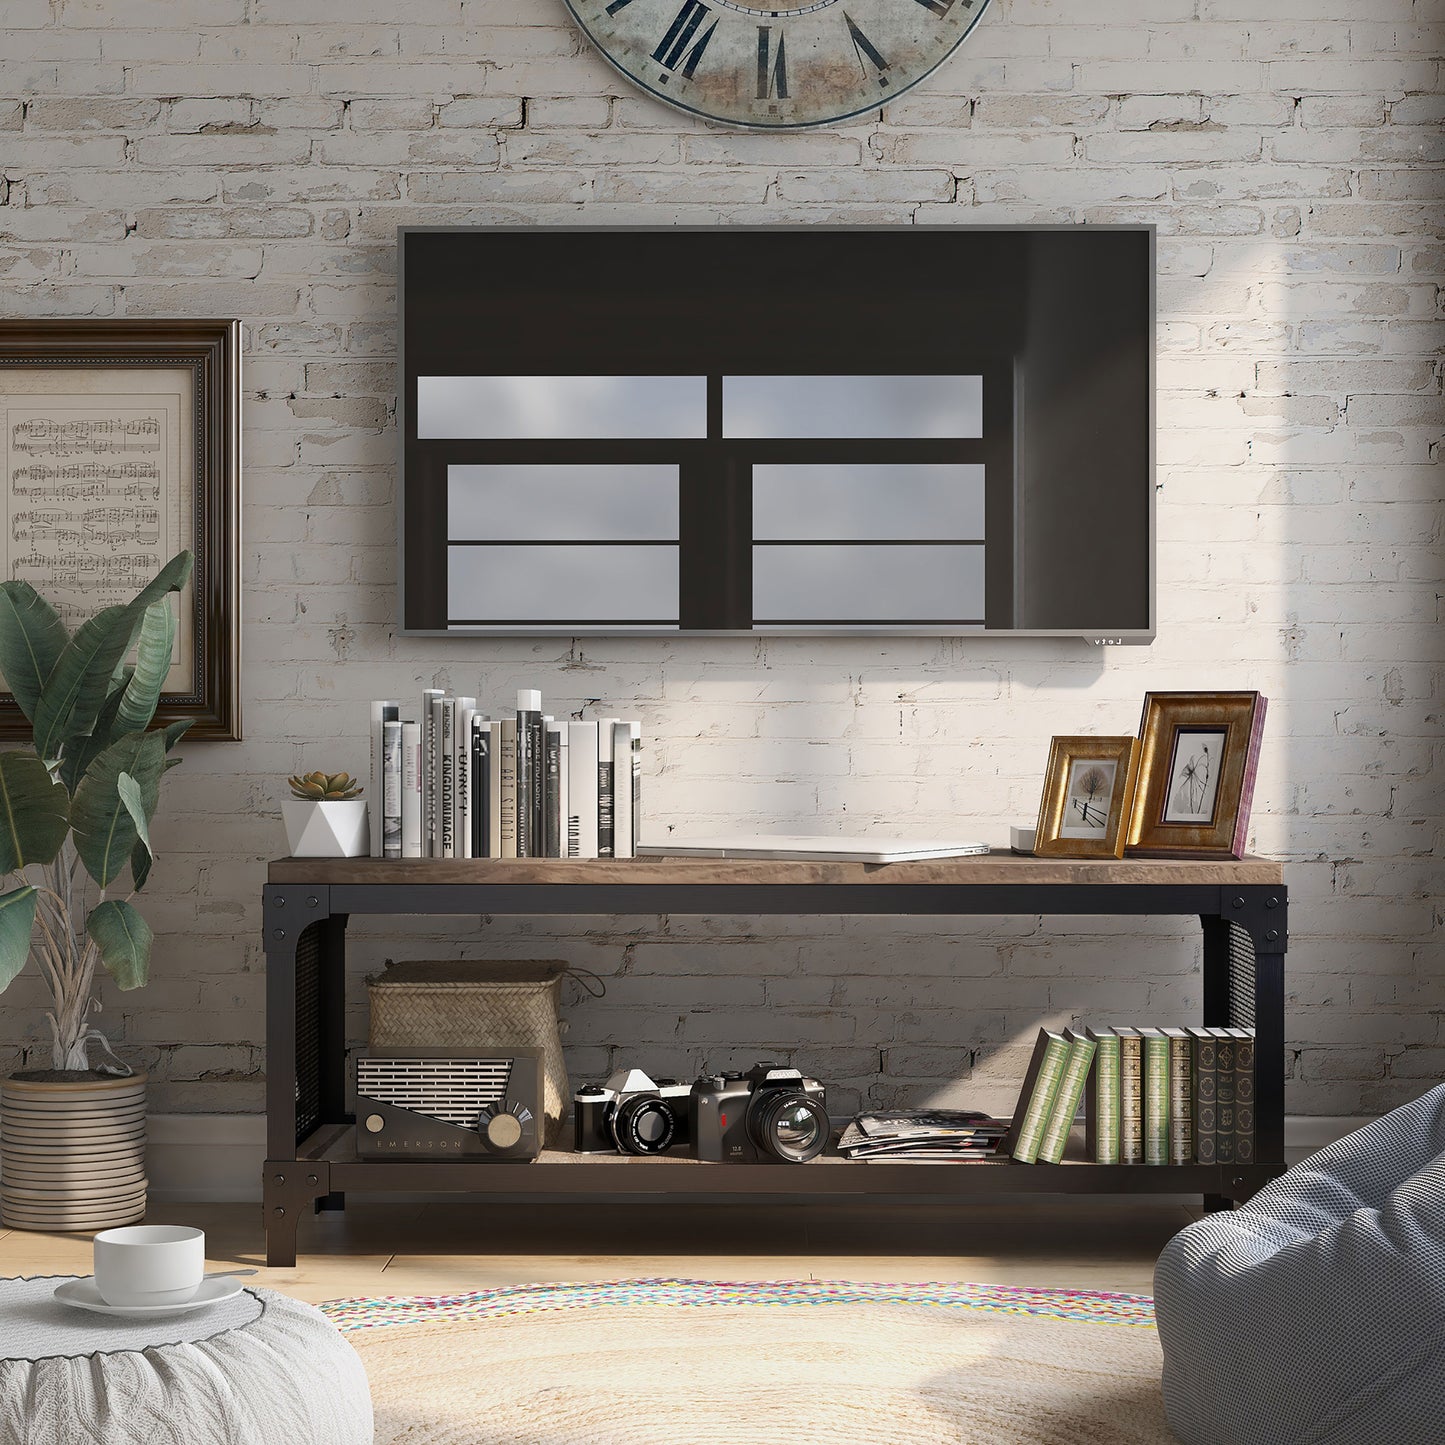 Front-facing industrial reclaimed barnwood shoe storage bench with a shelf in a living area with accessories